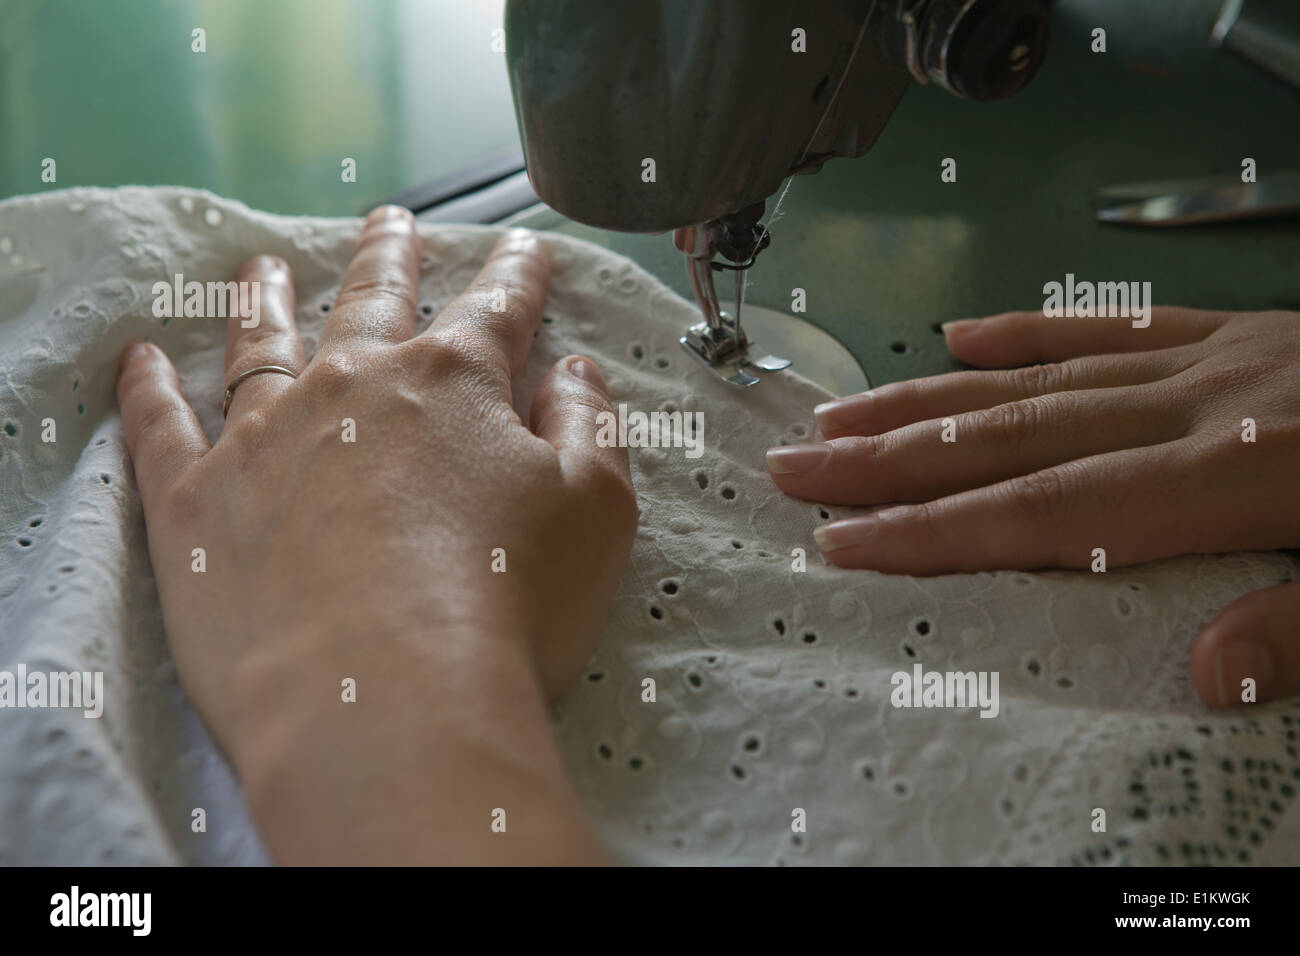 Hands of a dressmaker supporting a cloth while sewing on a sewing machine, Spain Stock Photo